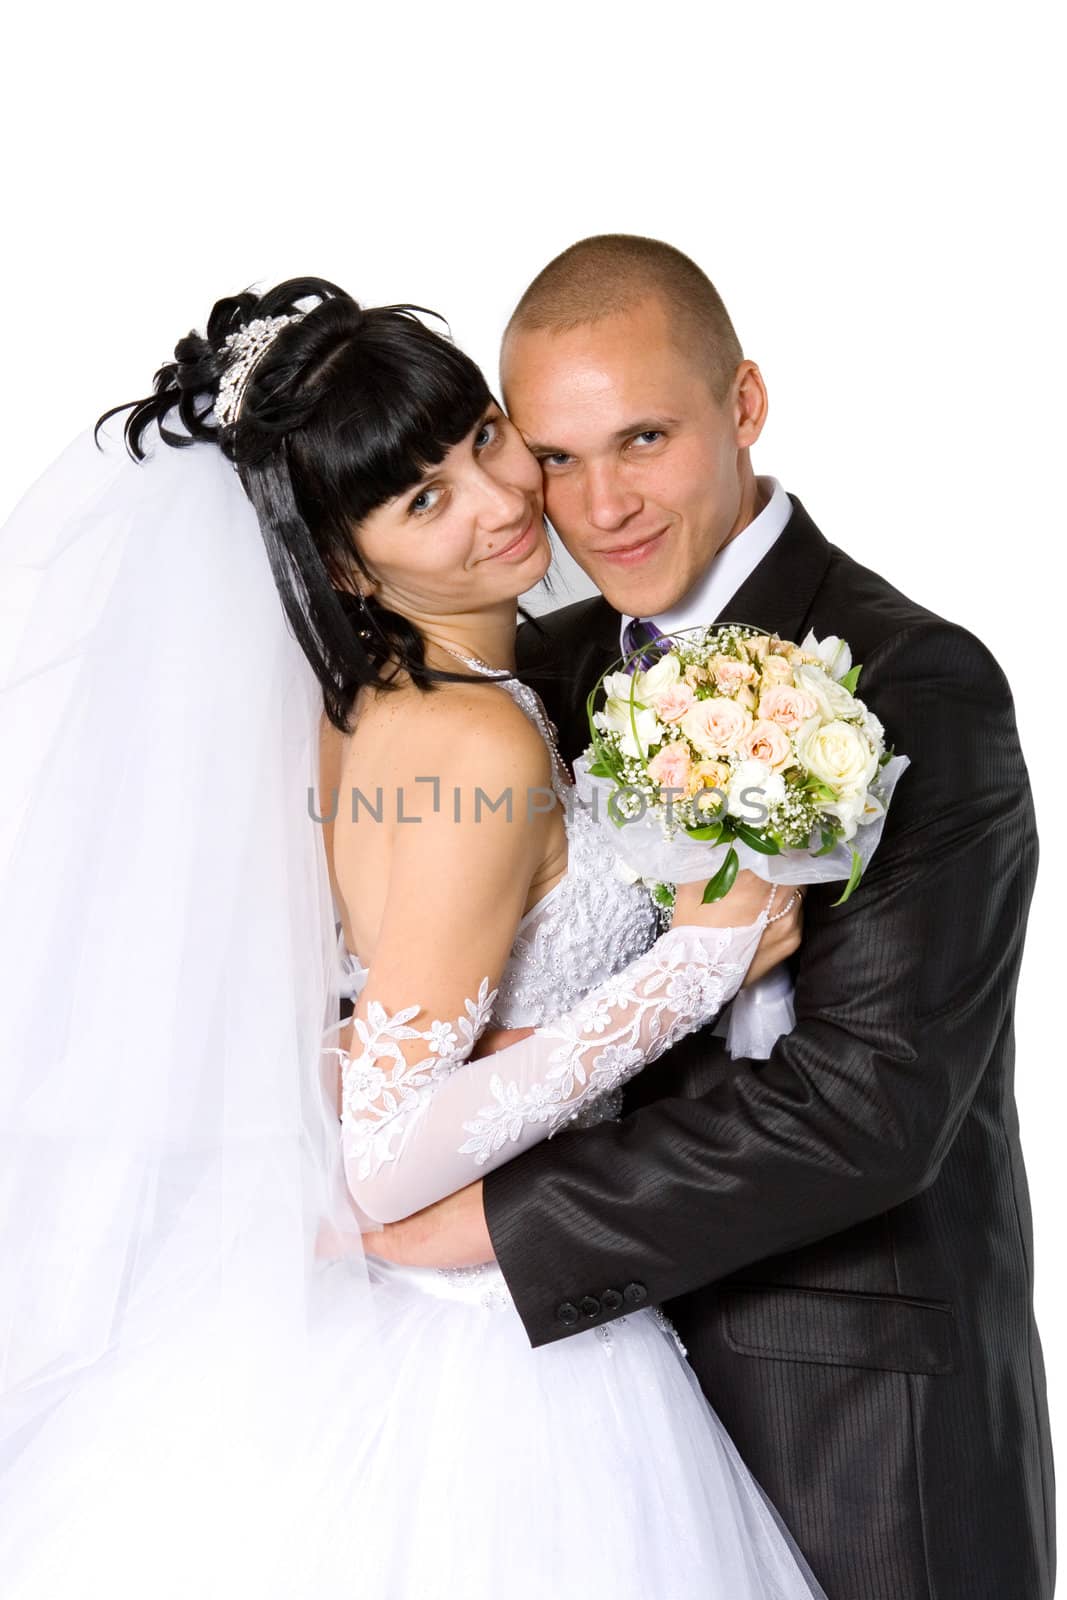 bride to the bridegroom on a white background
